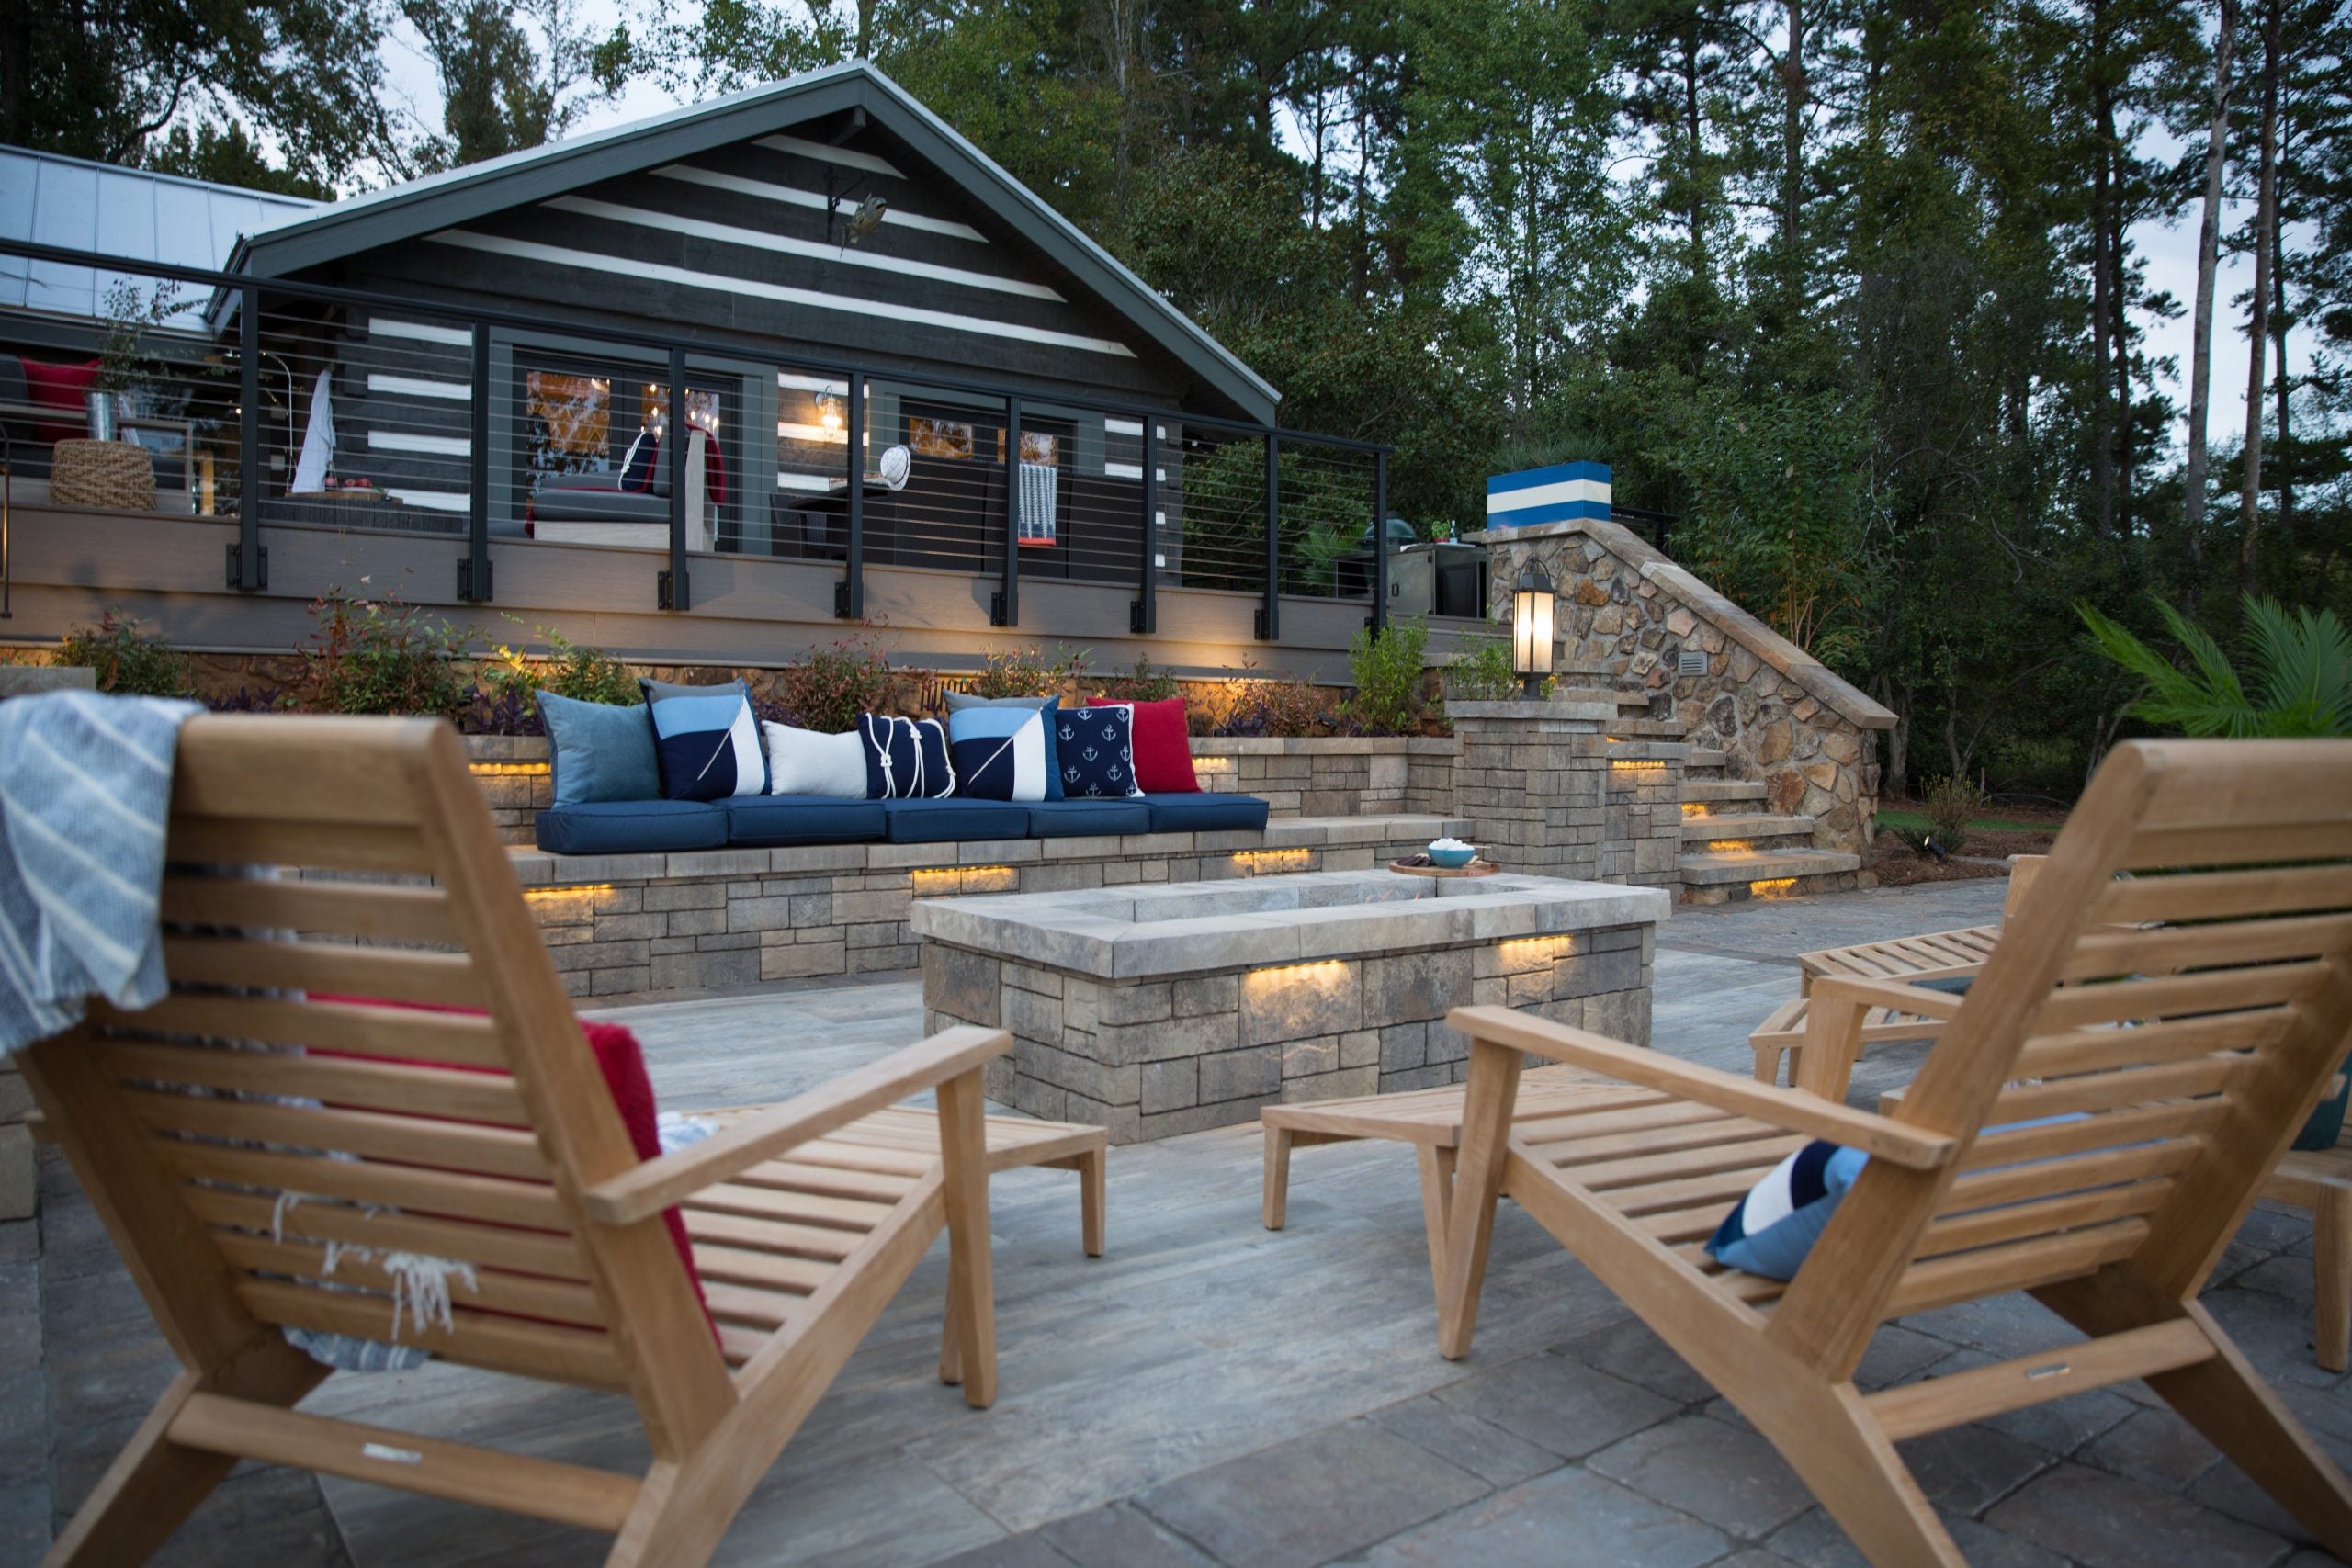 Fire pit patio and seat wall design ideas (Wade Works Creative)